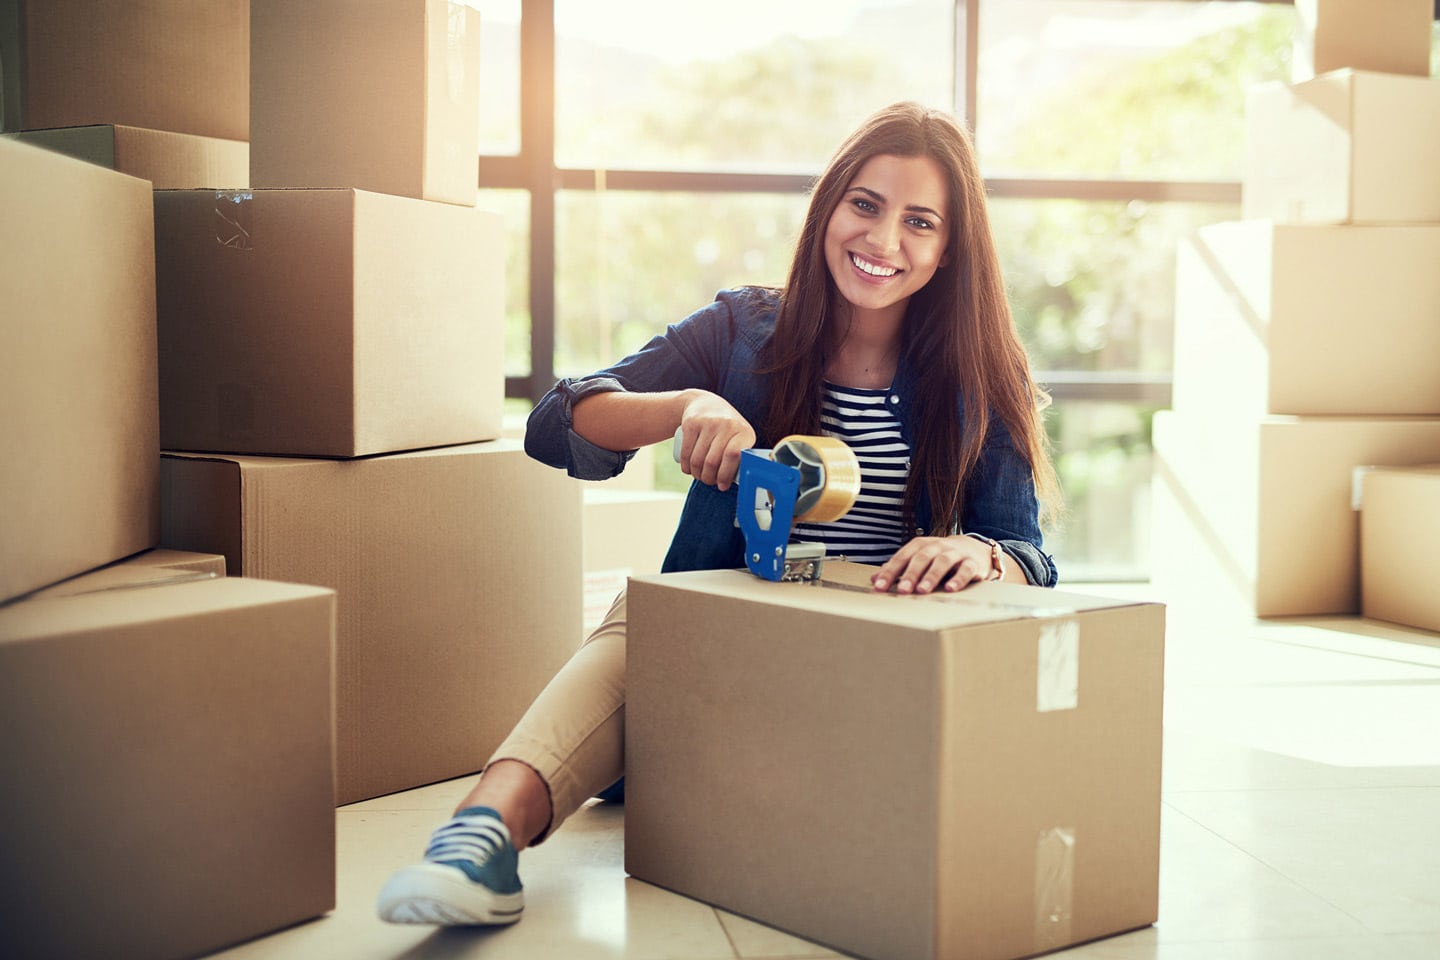 Woman packing boxes for a business relocation move